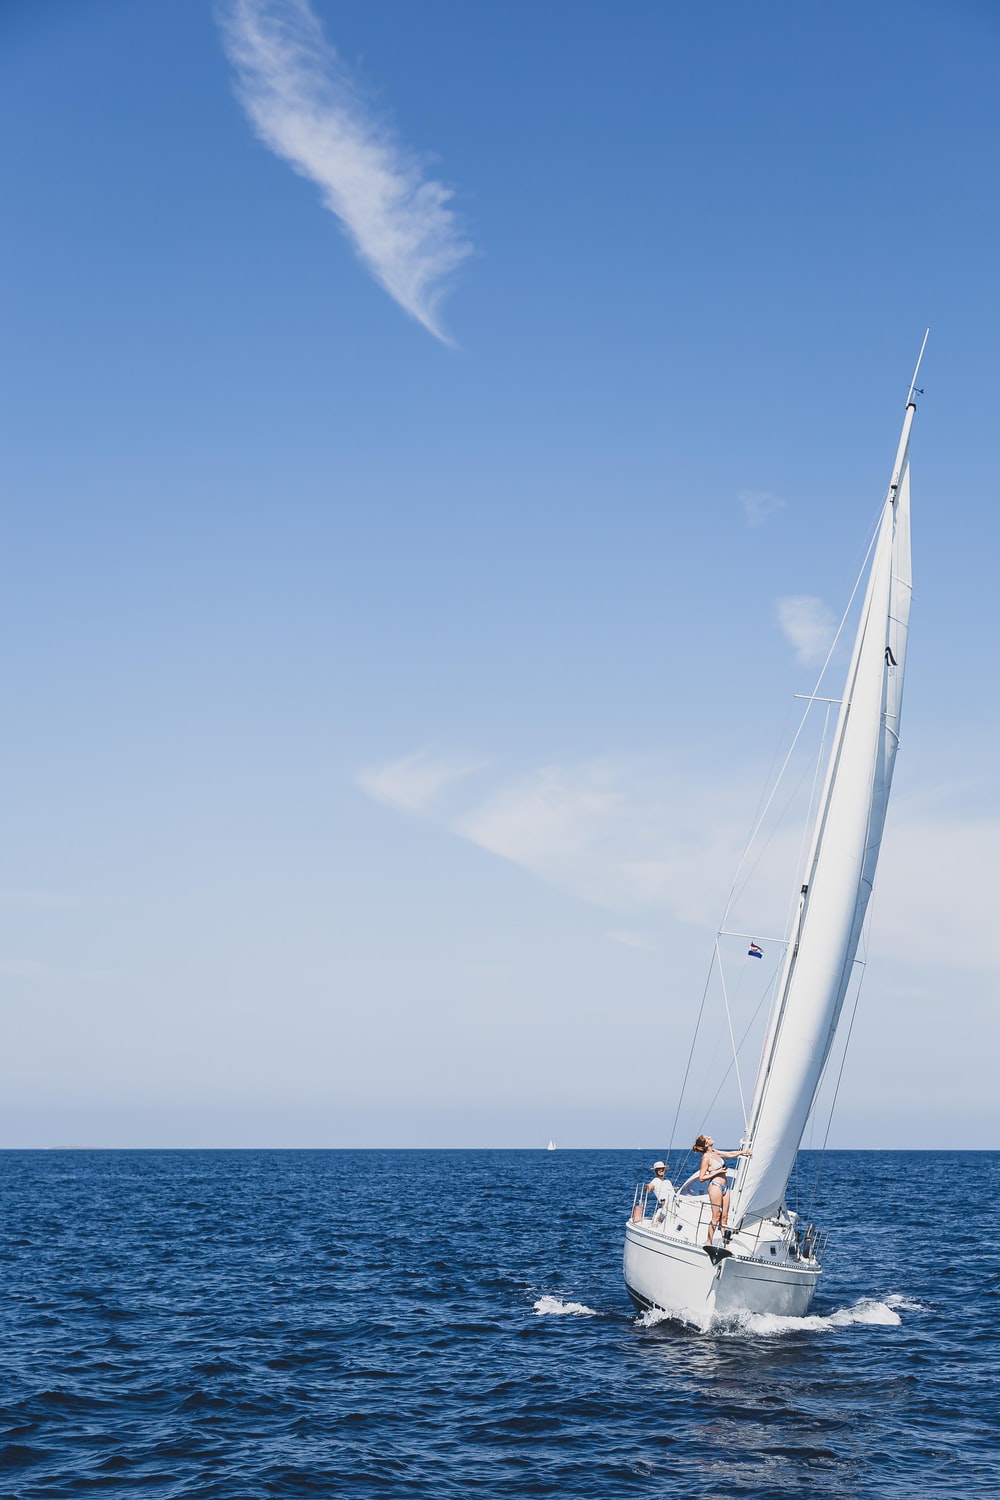 Sailboats Picture. Download Free Image